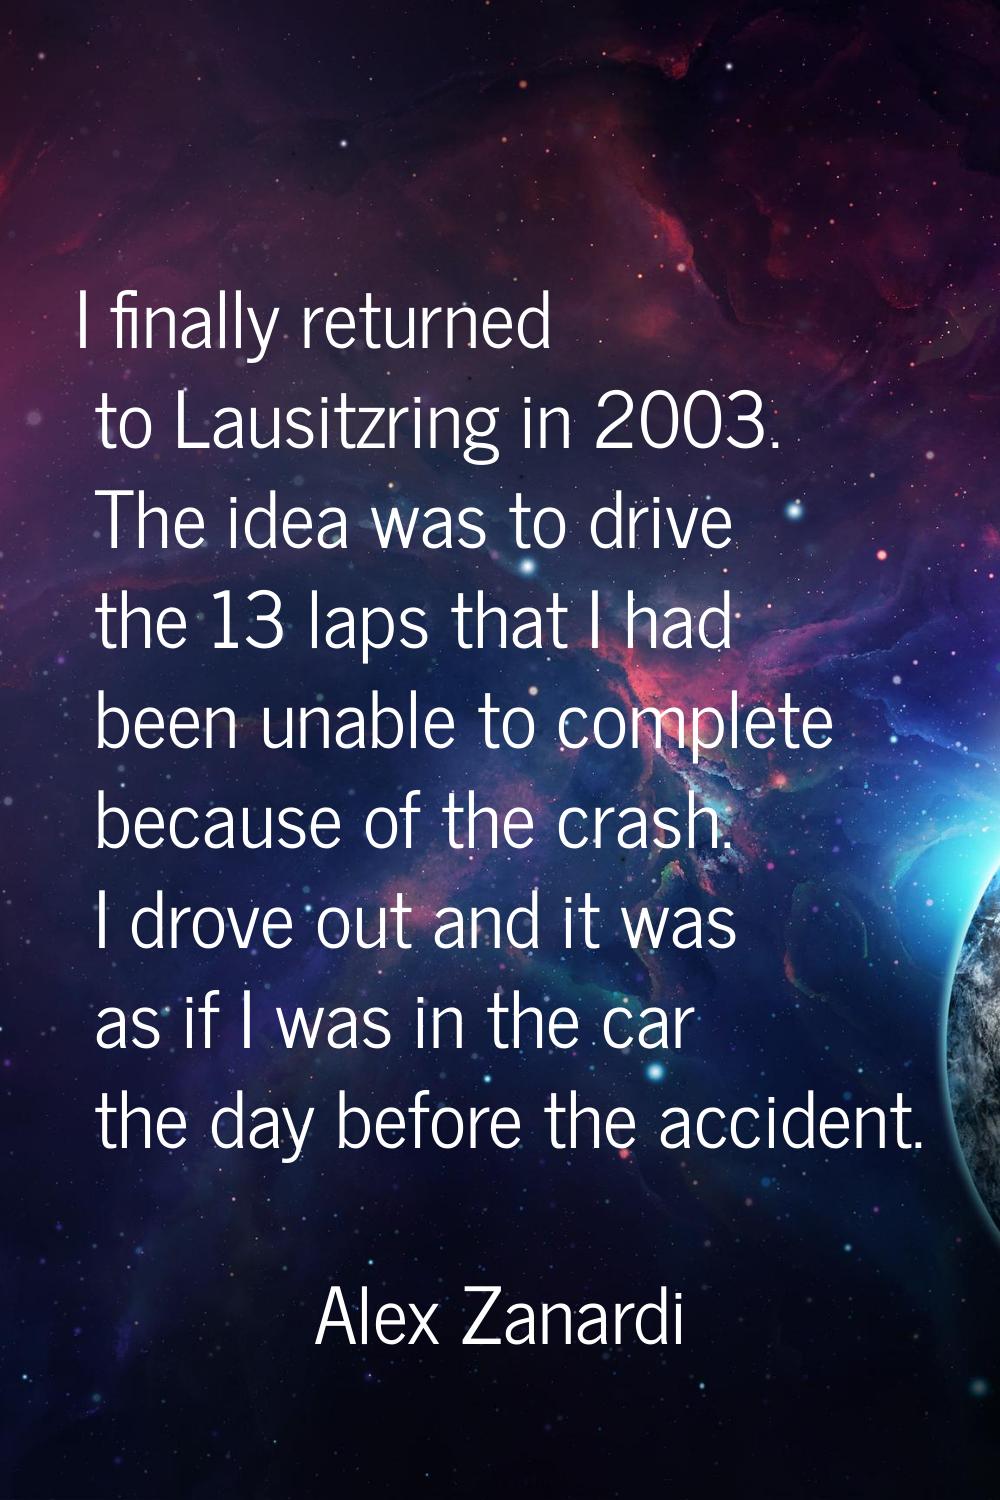 I finally returned to Lausitzring in 2003. The idea was to drive the 13 laps that I had been unable